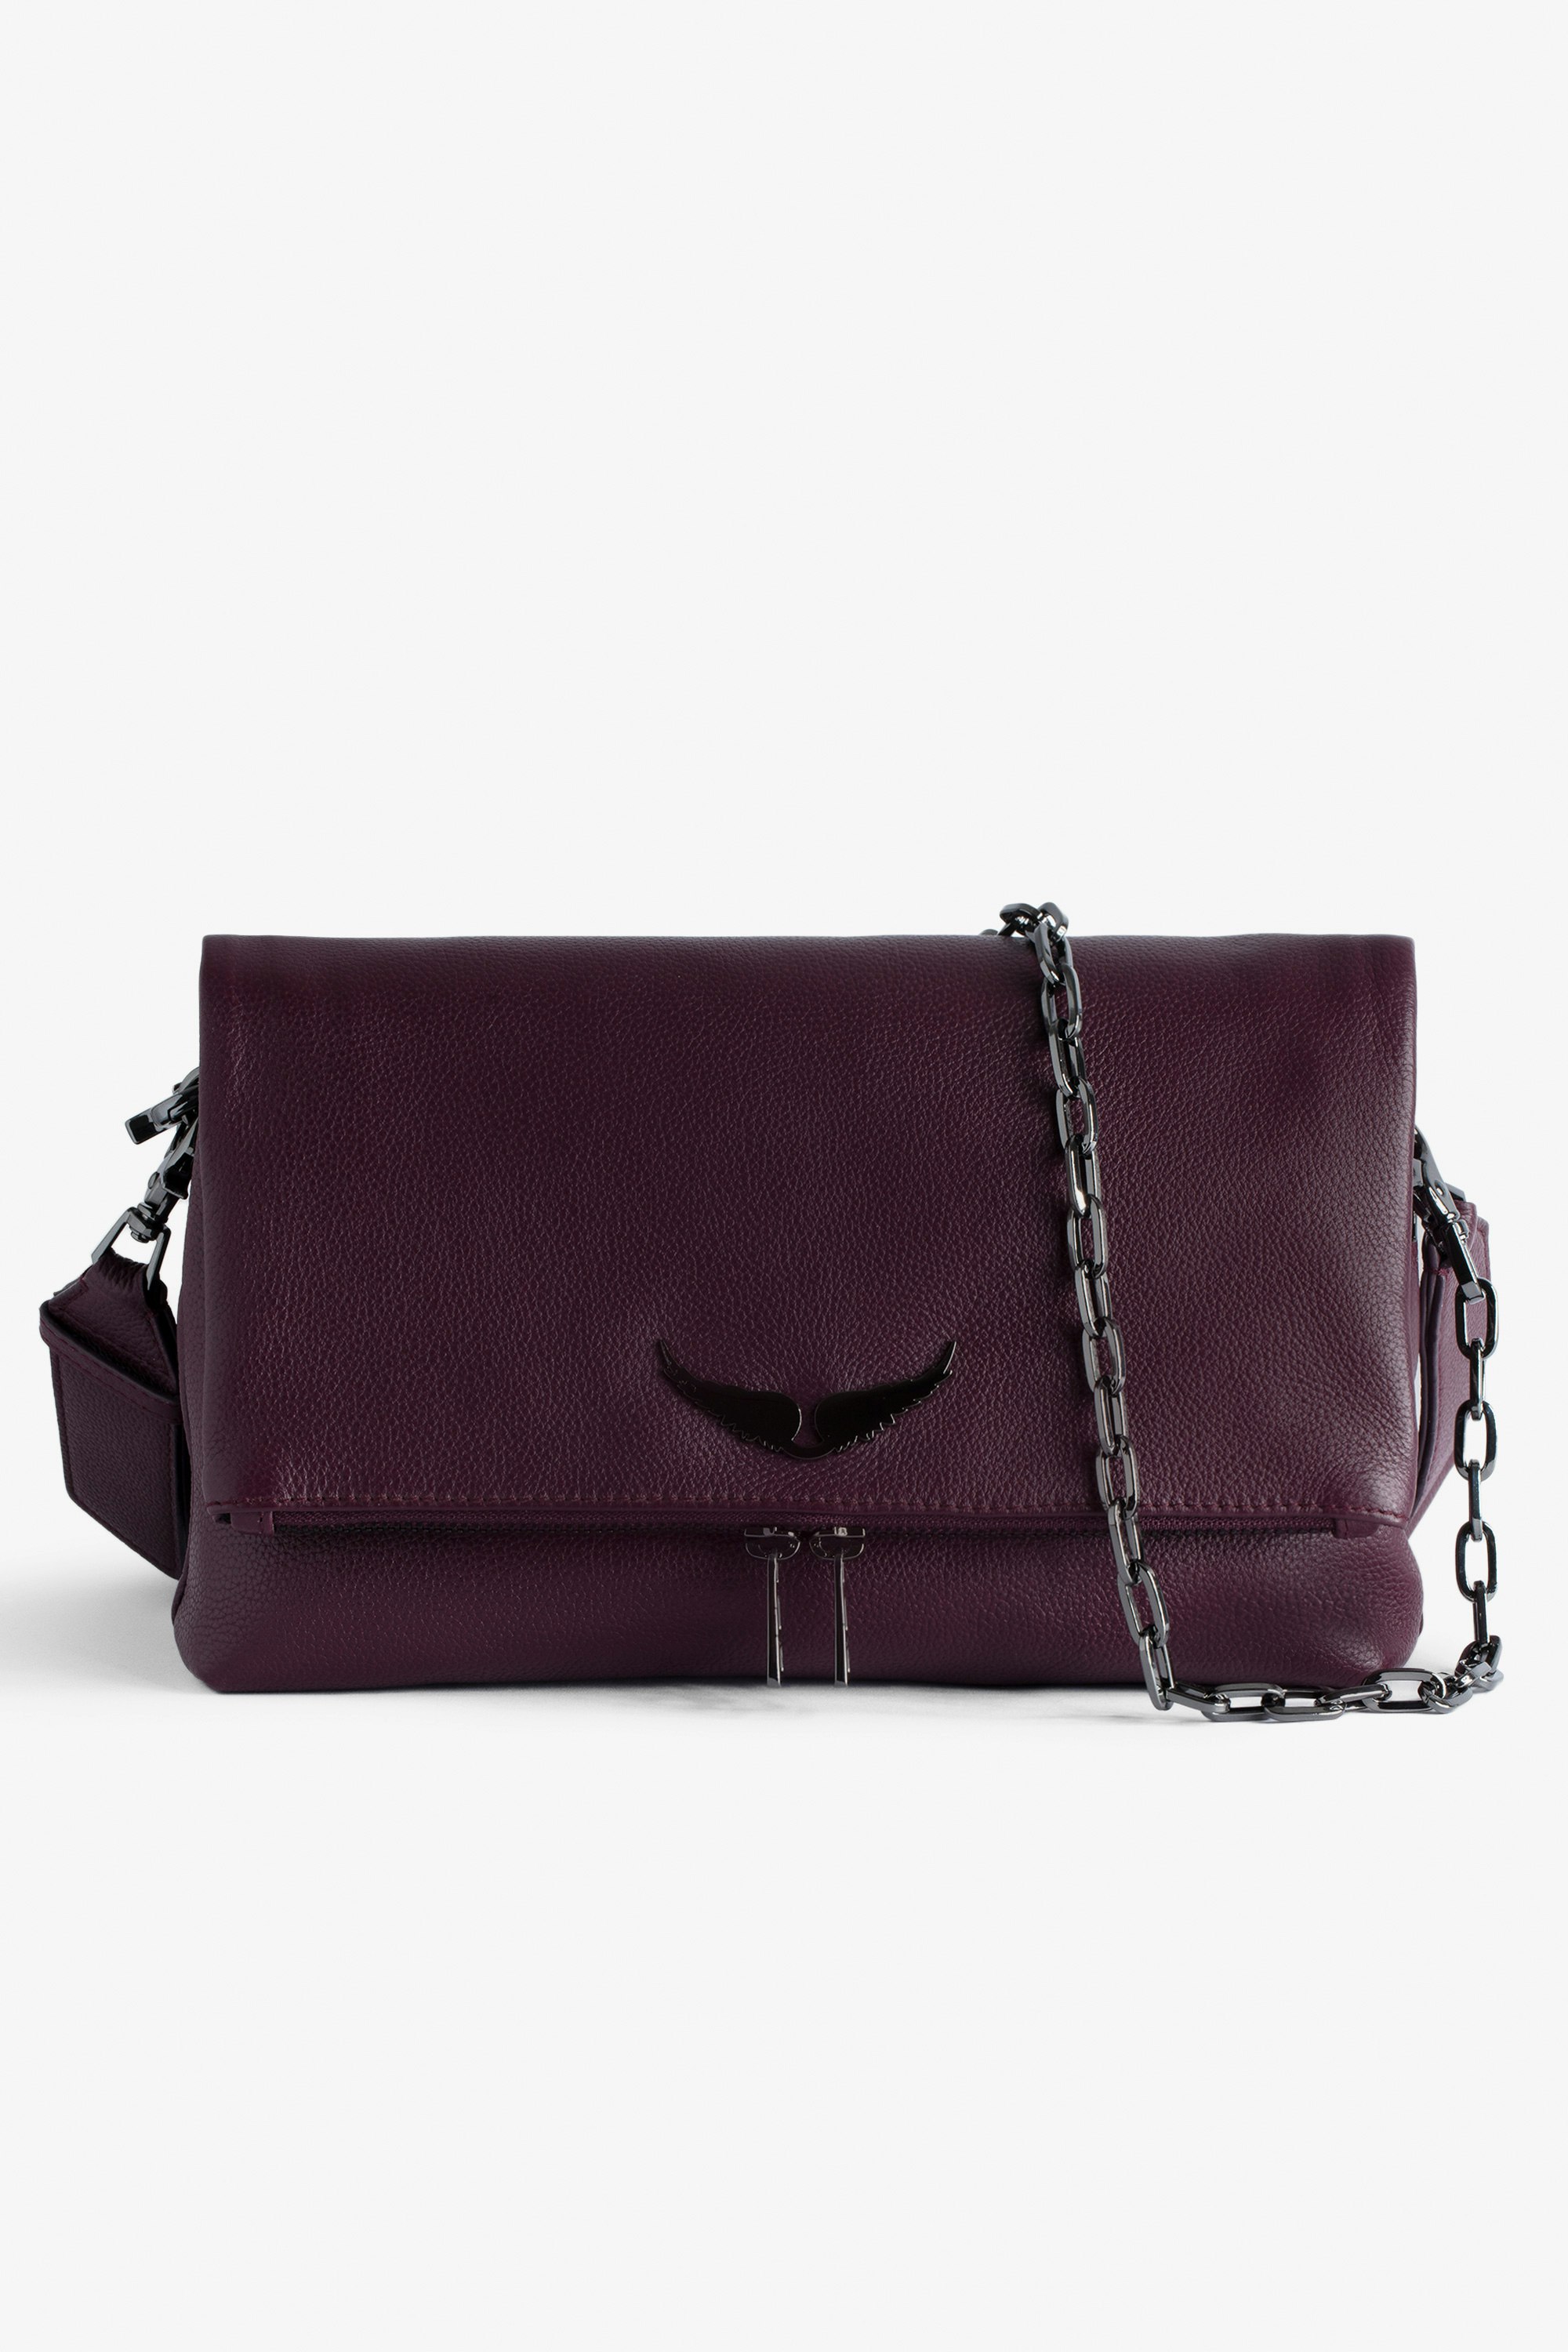 Rocky バッグ - Women’s burgundy grained leather bag with shoulder strap and wings charm